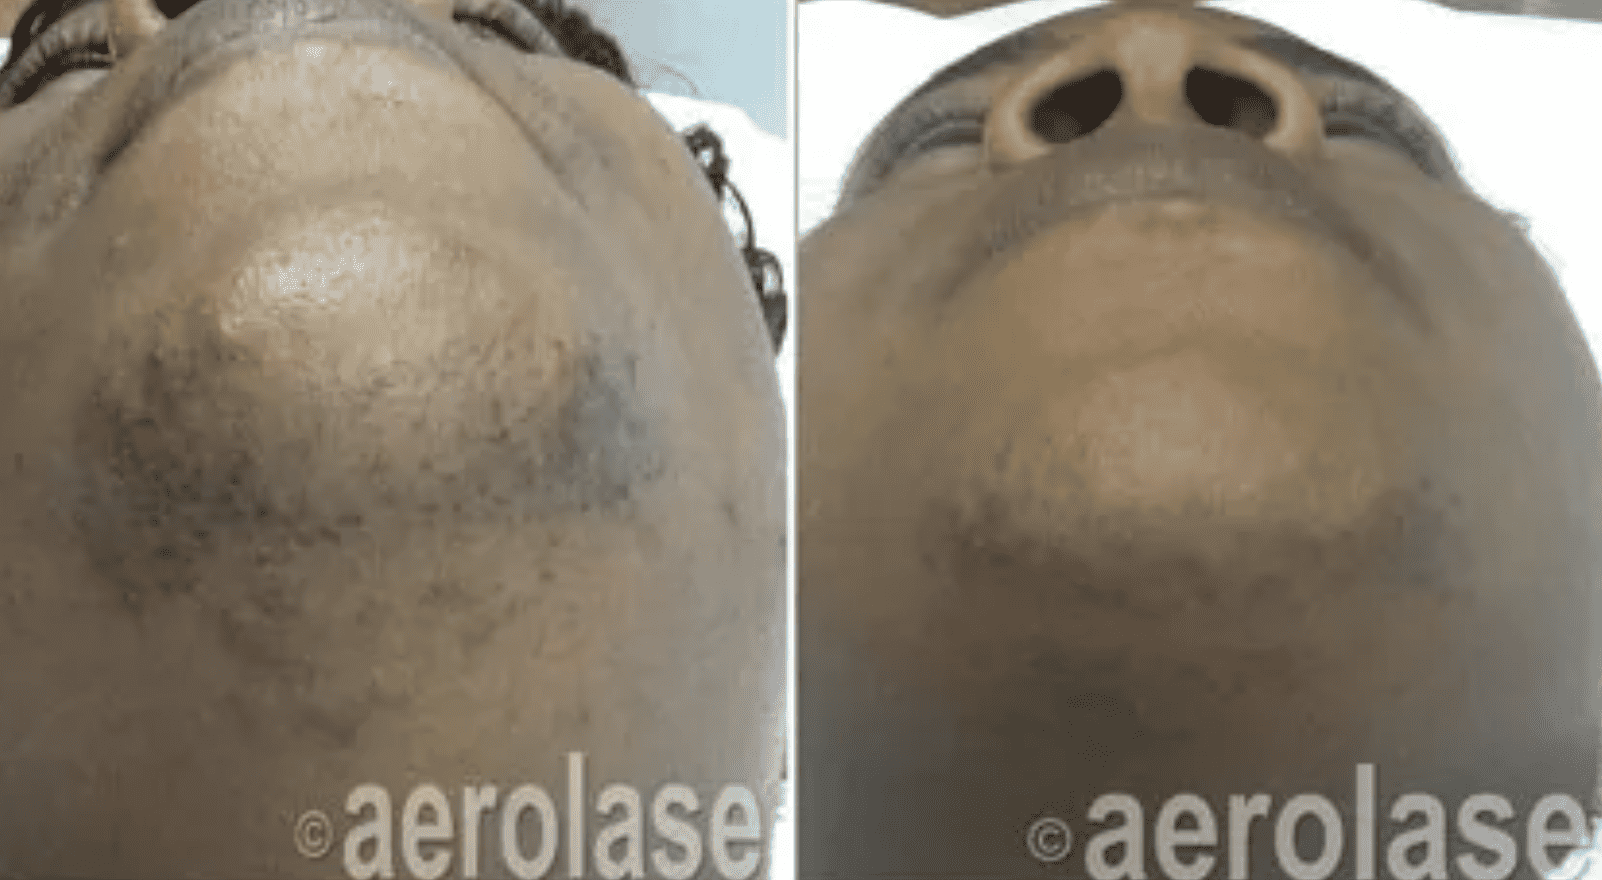 Before and after treatment using an Aerolase Neo Elite Laser.